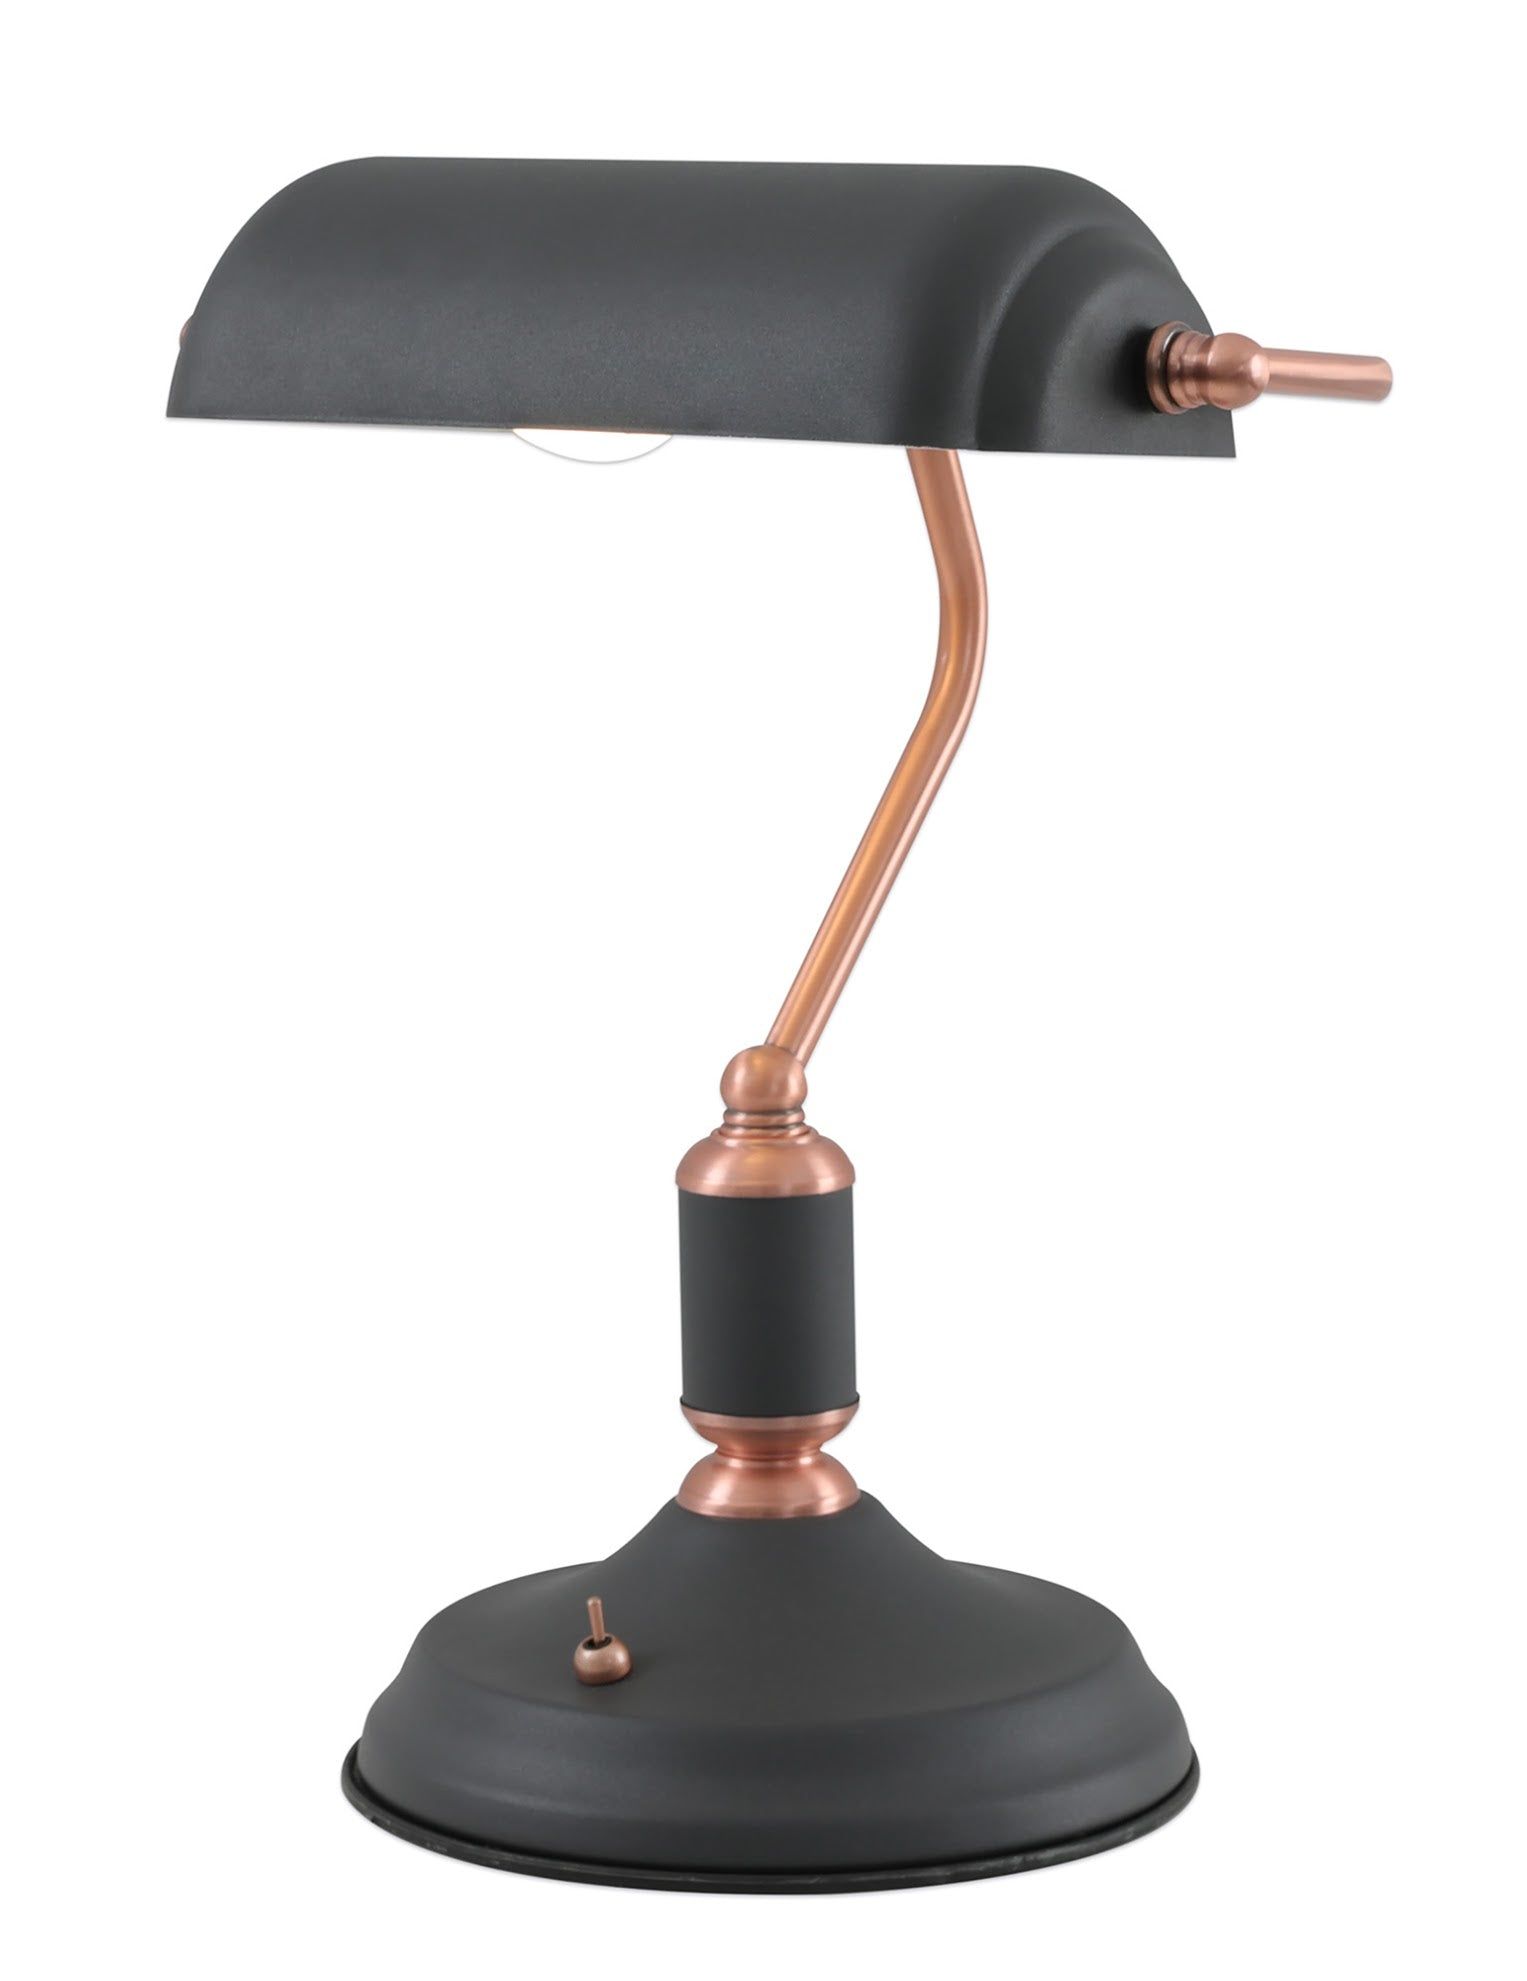 Ietson Table Lamp 1 Light With Toggle Switch, Graphite/Copper